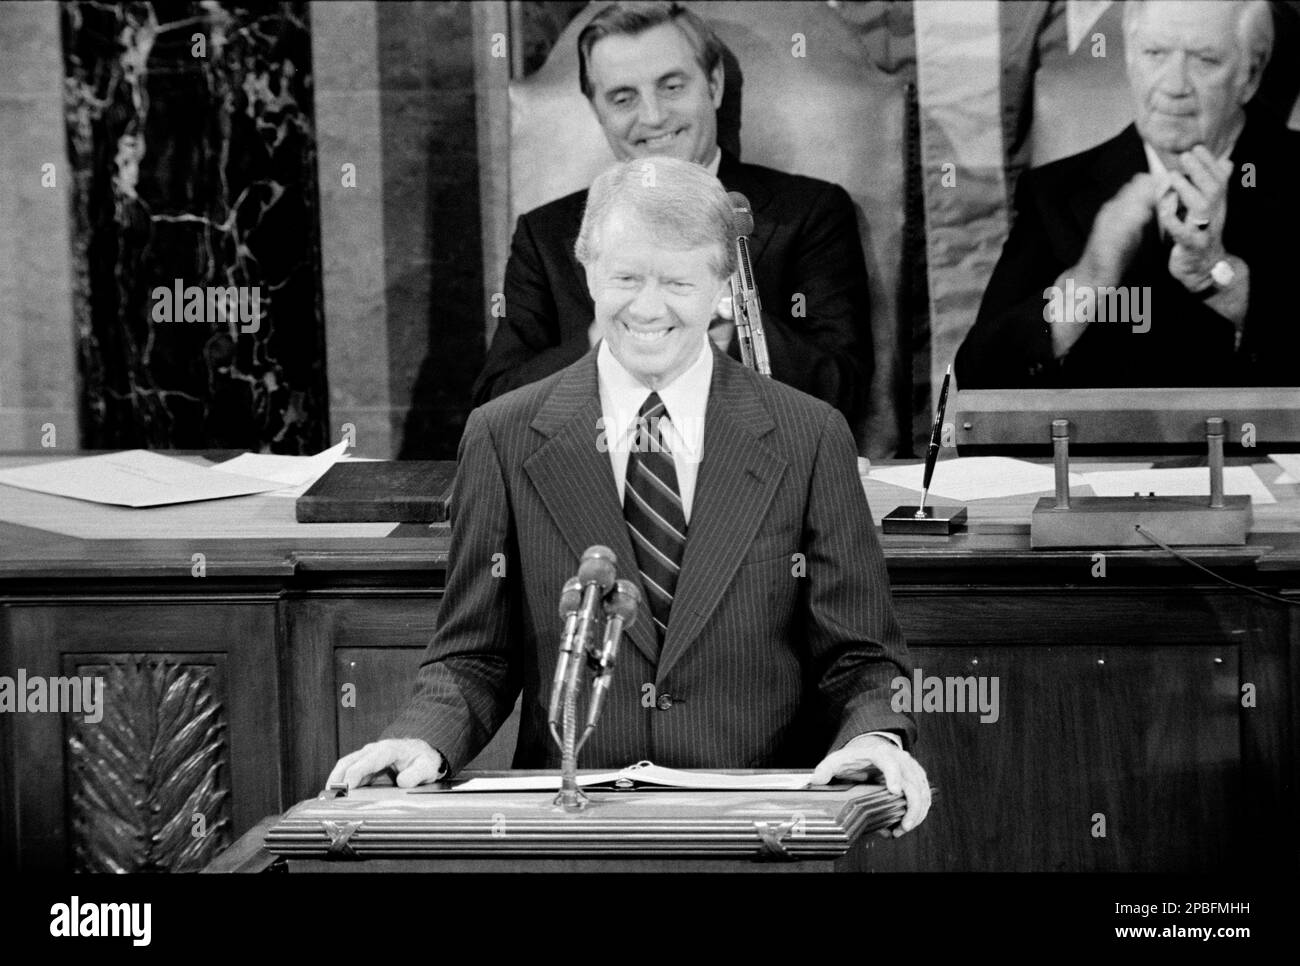 1978 , 18 september , USA : President Jimmy Carter addresses a Joint Session of Congress, announcing the results of the Camp David Accords, with Vice President Walter Mondale and Speaker of the House Tip O'Neill seated behind him. Begin and  egyptian president  Sadat present . Photo by  Warren K. Leffler . Official photo by White House Press Office - Presidente della Repubblica - USA - ritratto - portrait - cravatta - tie - collar - colletto  - UNITED STATES  - STATI UNITI  - smile - sorriso - conferenza di pace  ----  Archivio GBB Stock Photo